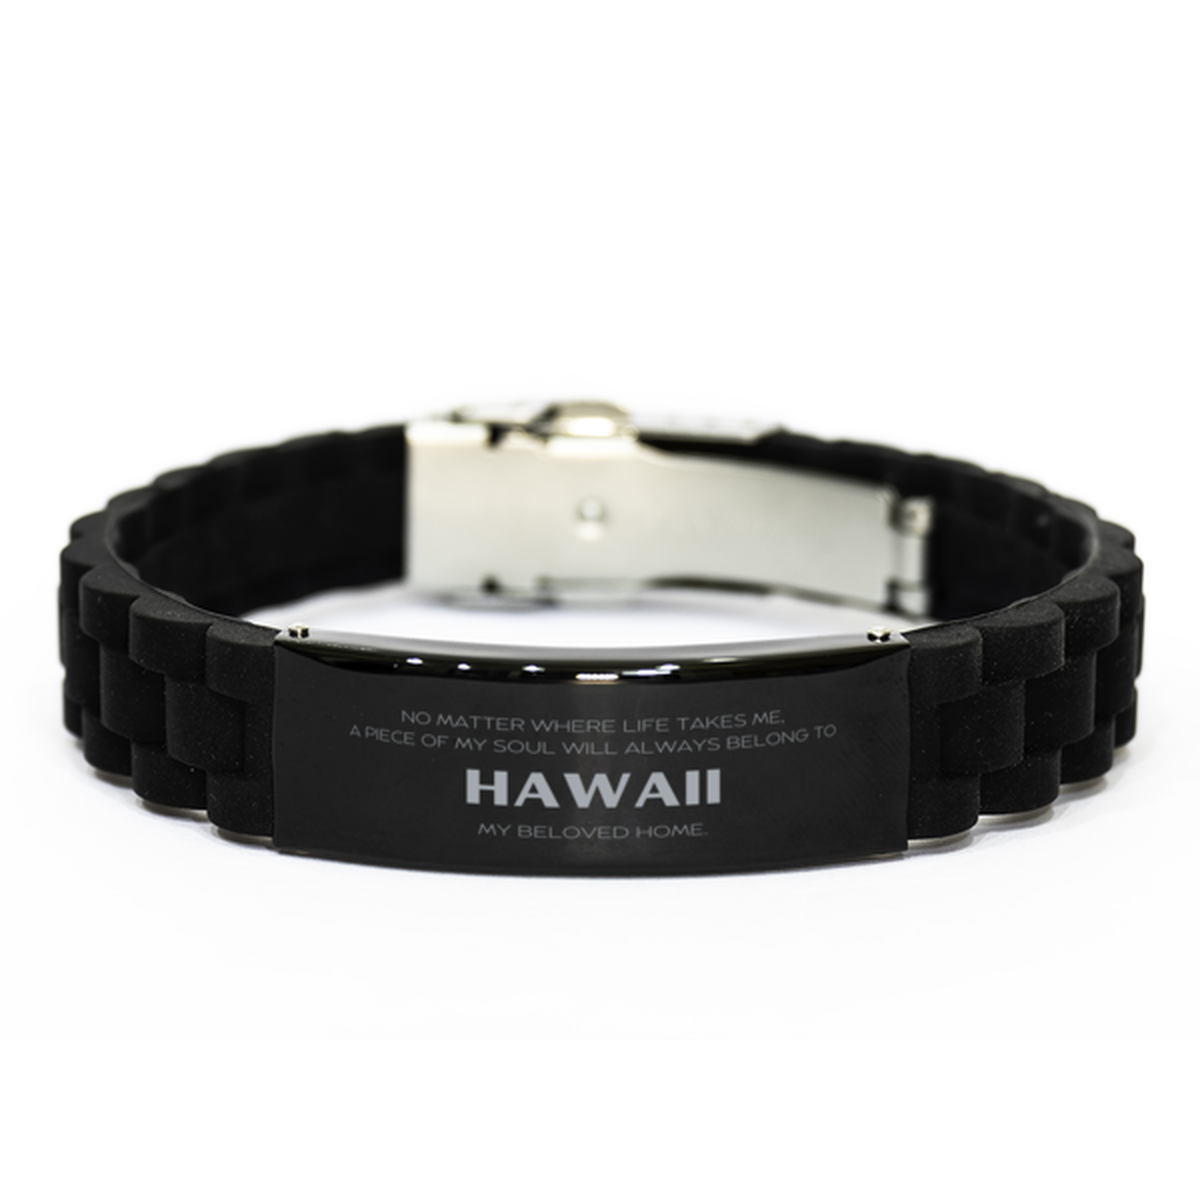 Love Hawaii State Gifts, My soul will always belong to Hawaii, Proud Black Glidelock Clasp Bracelet, Birthday Unique Gifts For Hawaii Men, Women, Friends